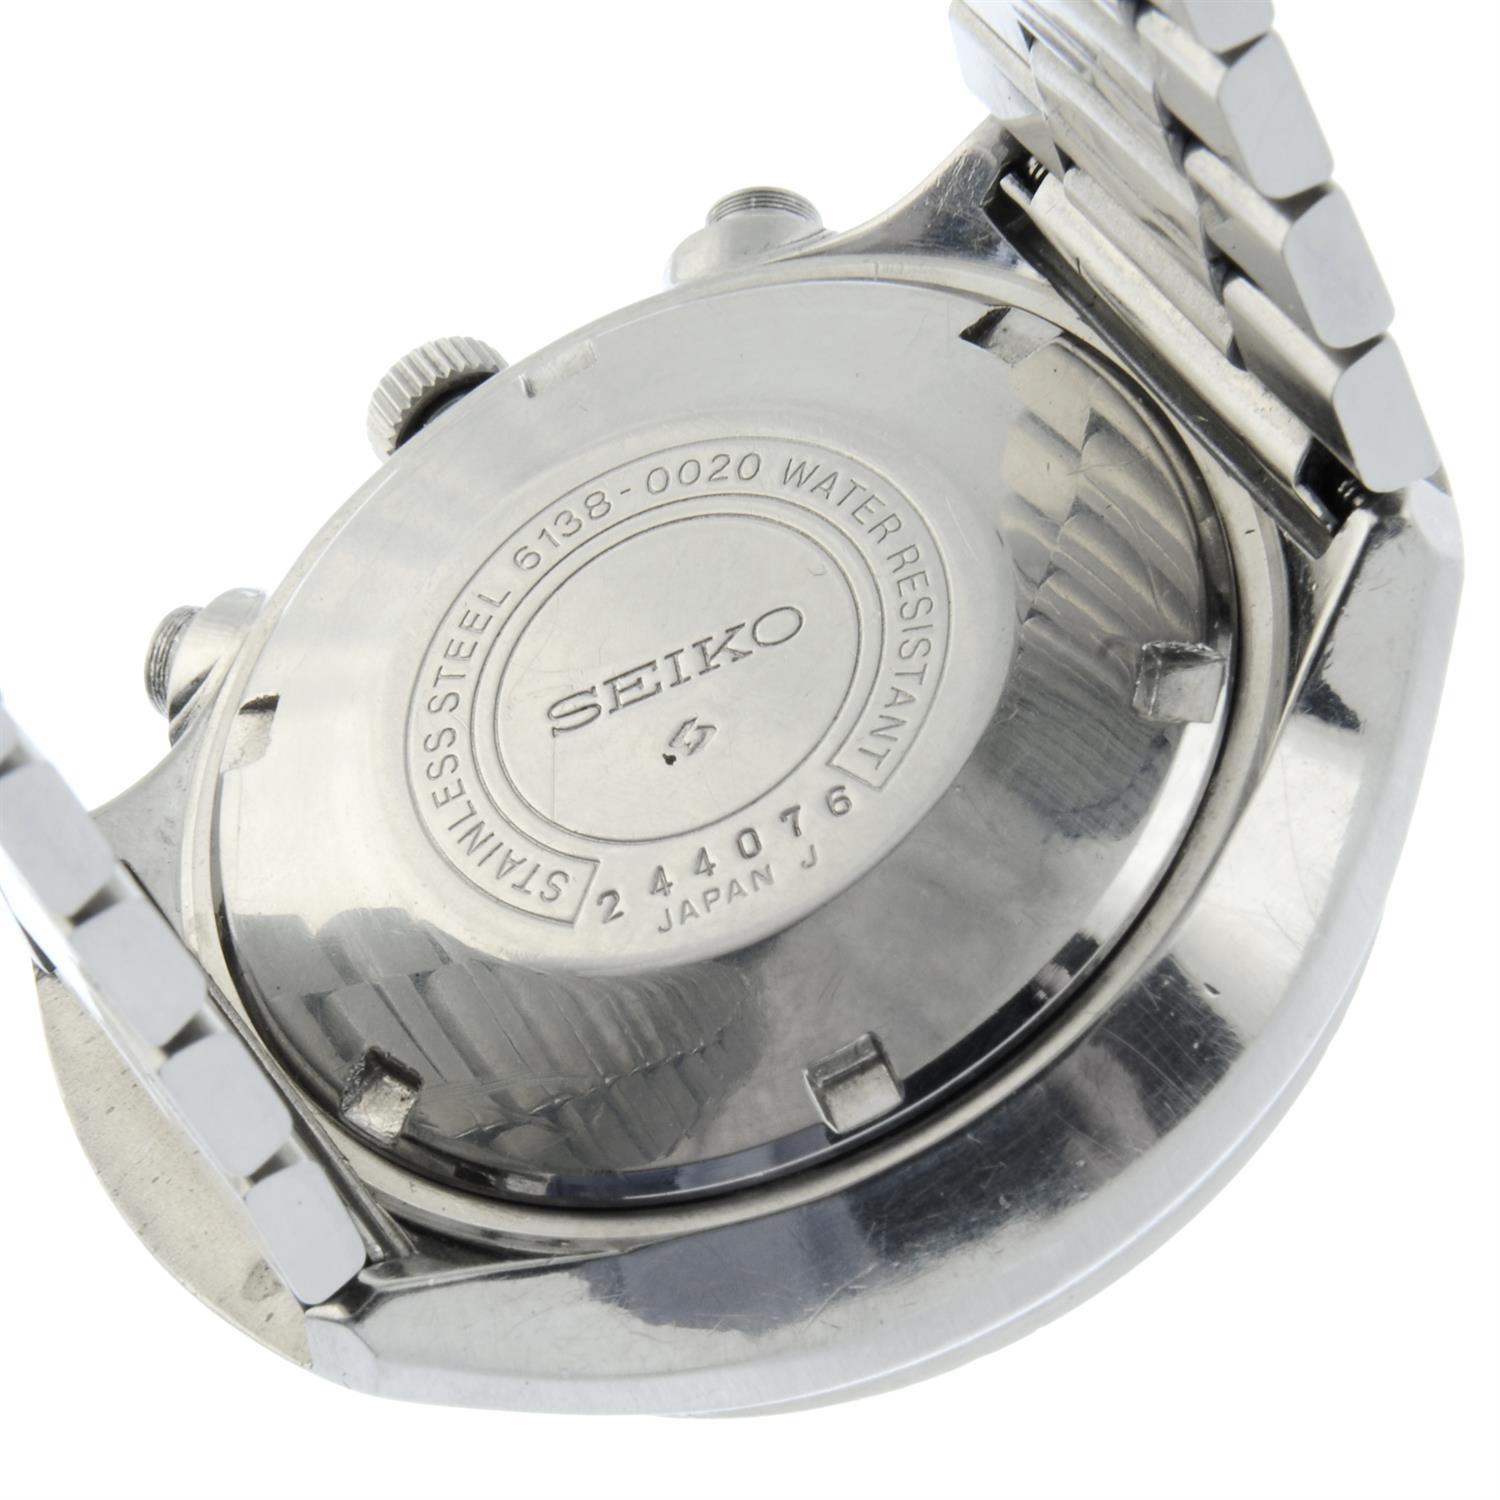 Seiko - a Speed-Timer chronograph watch, 42mm. - Image 4 of 4